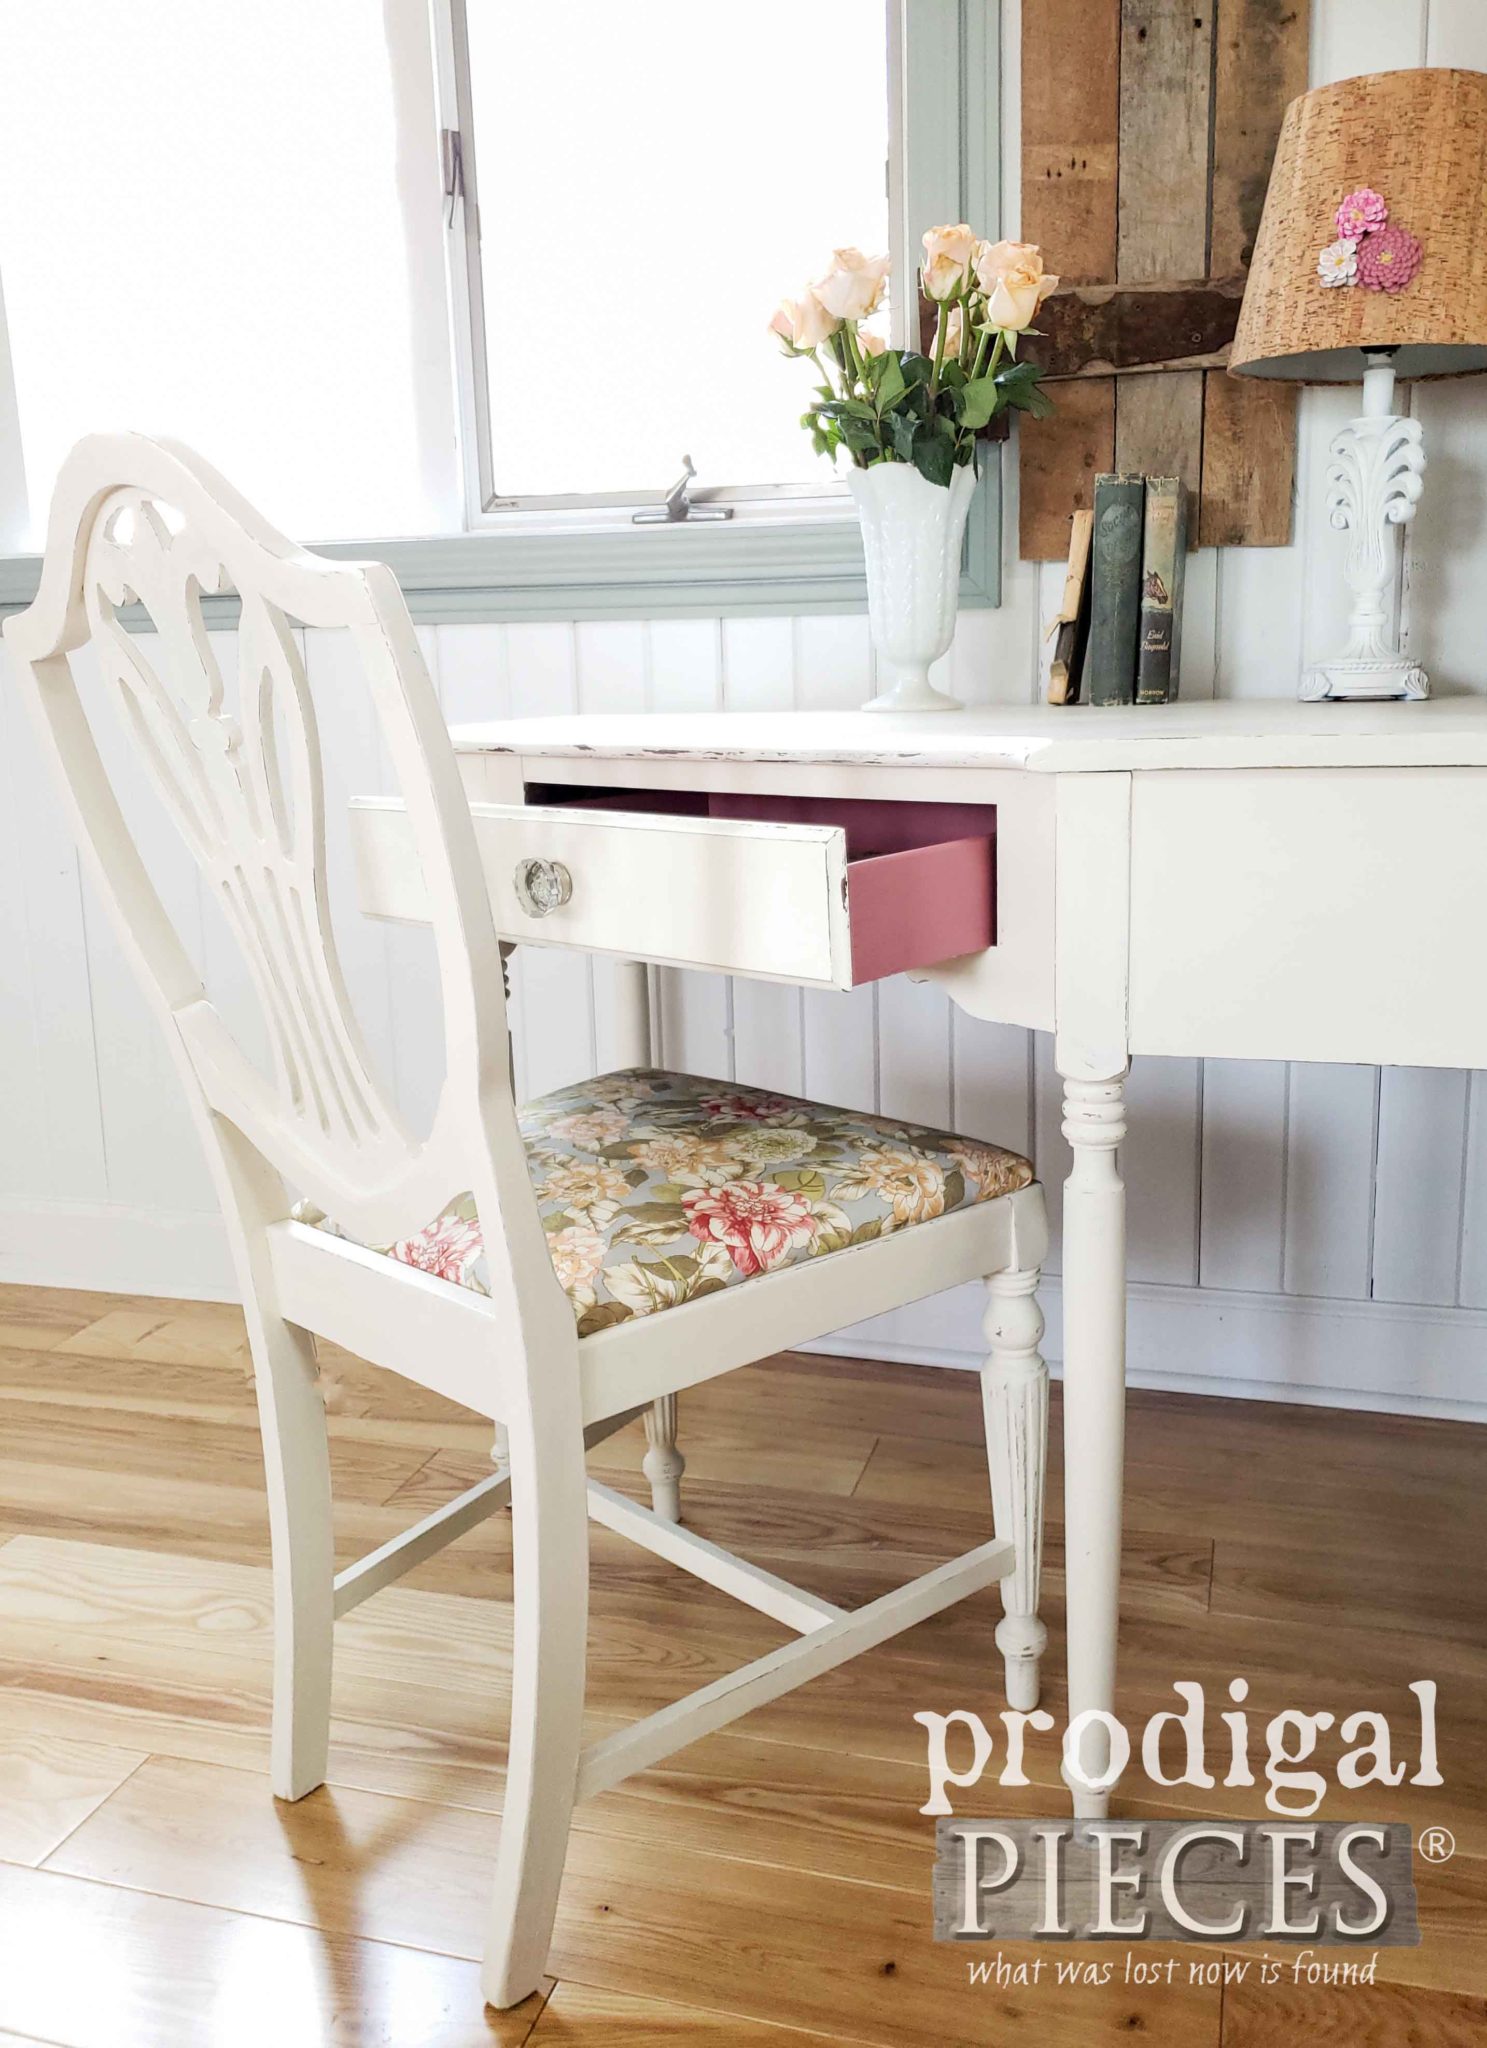 Vintage Corner Writing Desk and Chair with Peek-a-Boo Drawer by Larissa of Prodigal Pieces | prodigalpieces.com #prodigalpieces #diy #furniture #home #homedecor #vintage